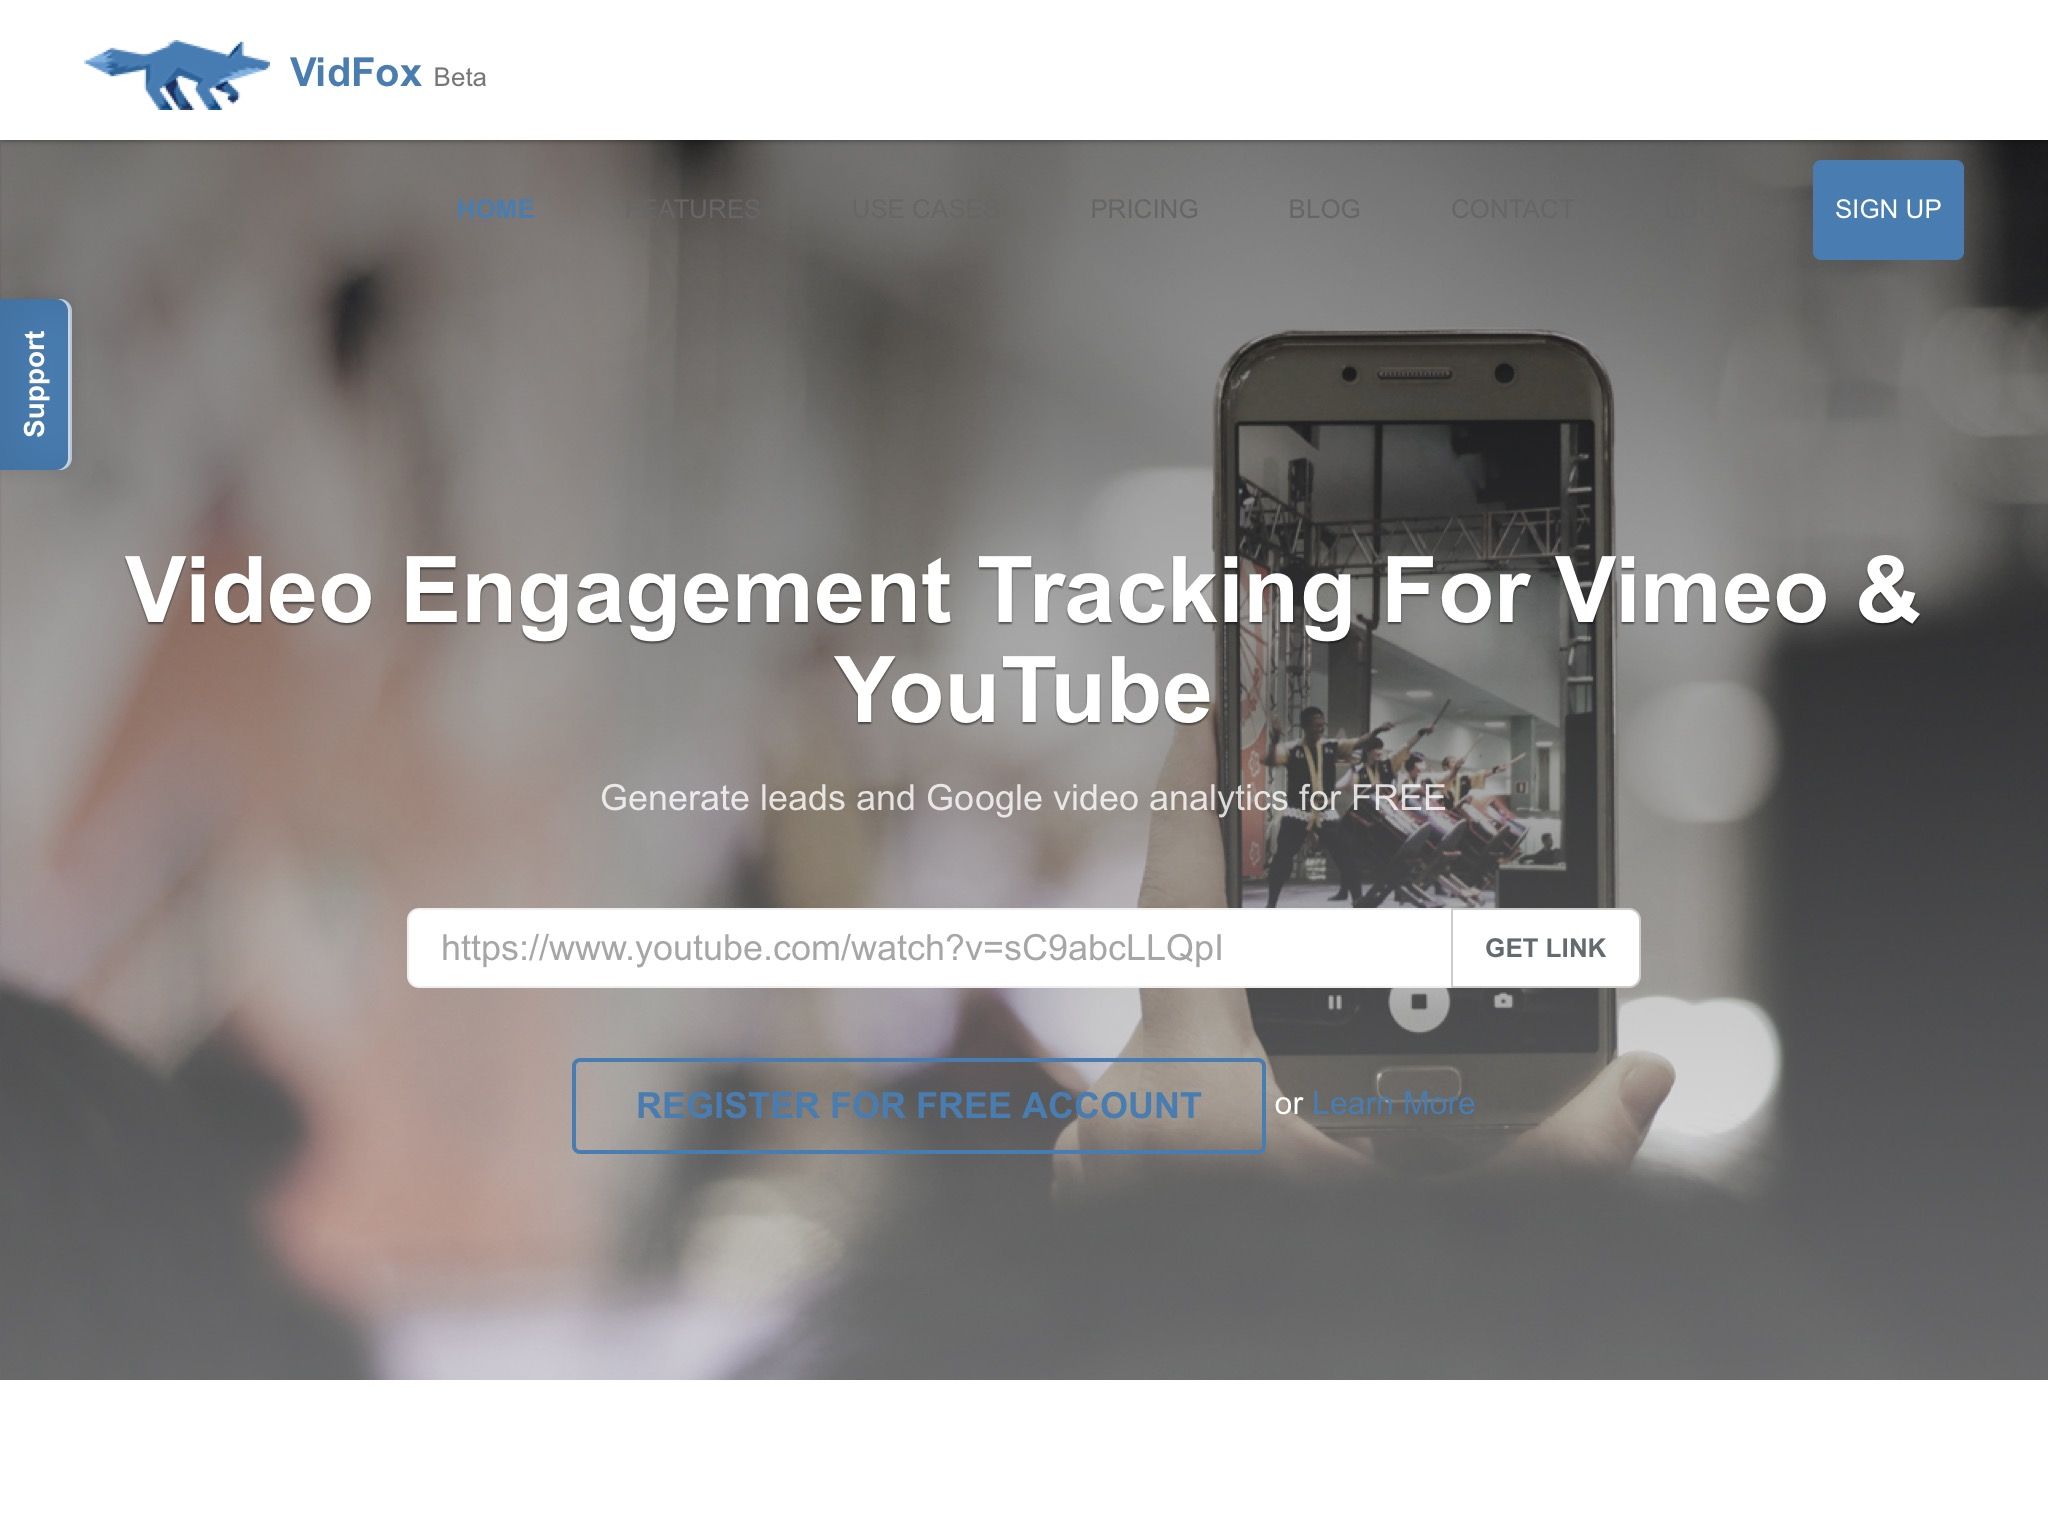 VidFox: Video engagement tracking for Vimeo & YouTube | BetaList